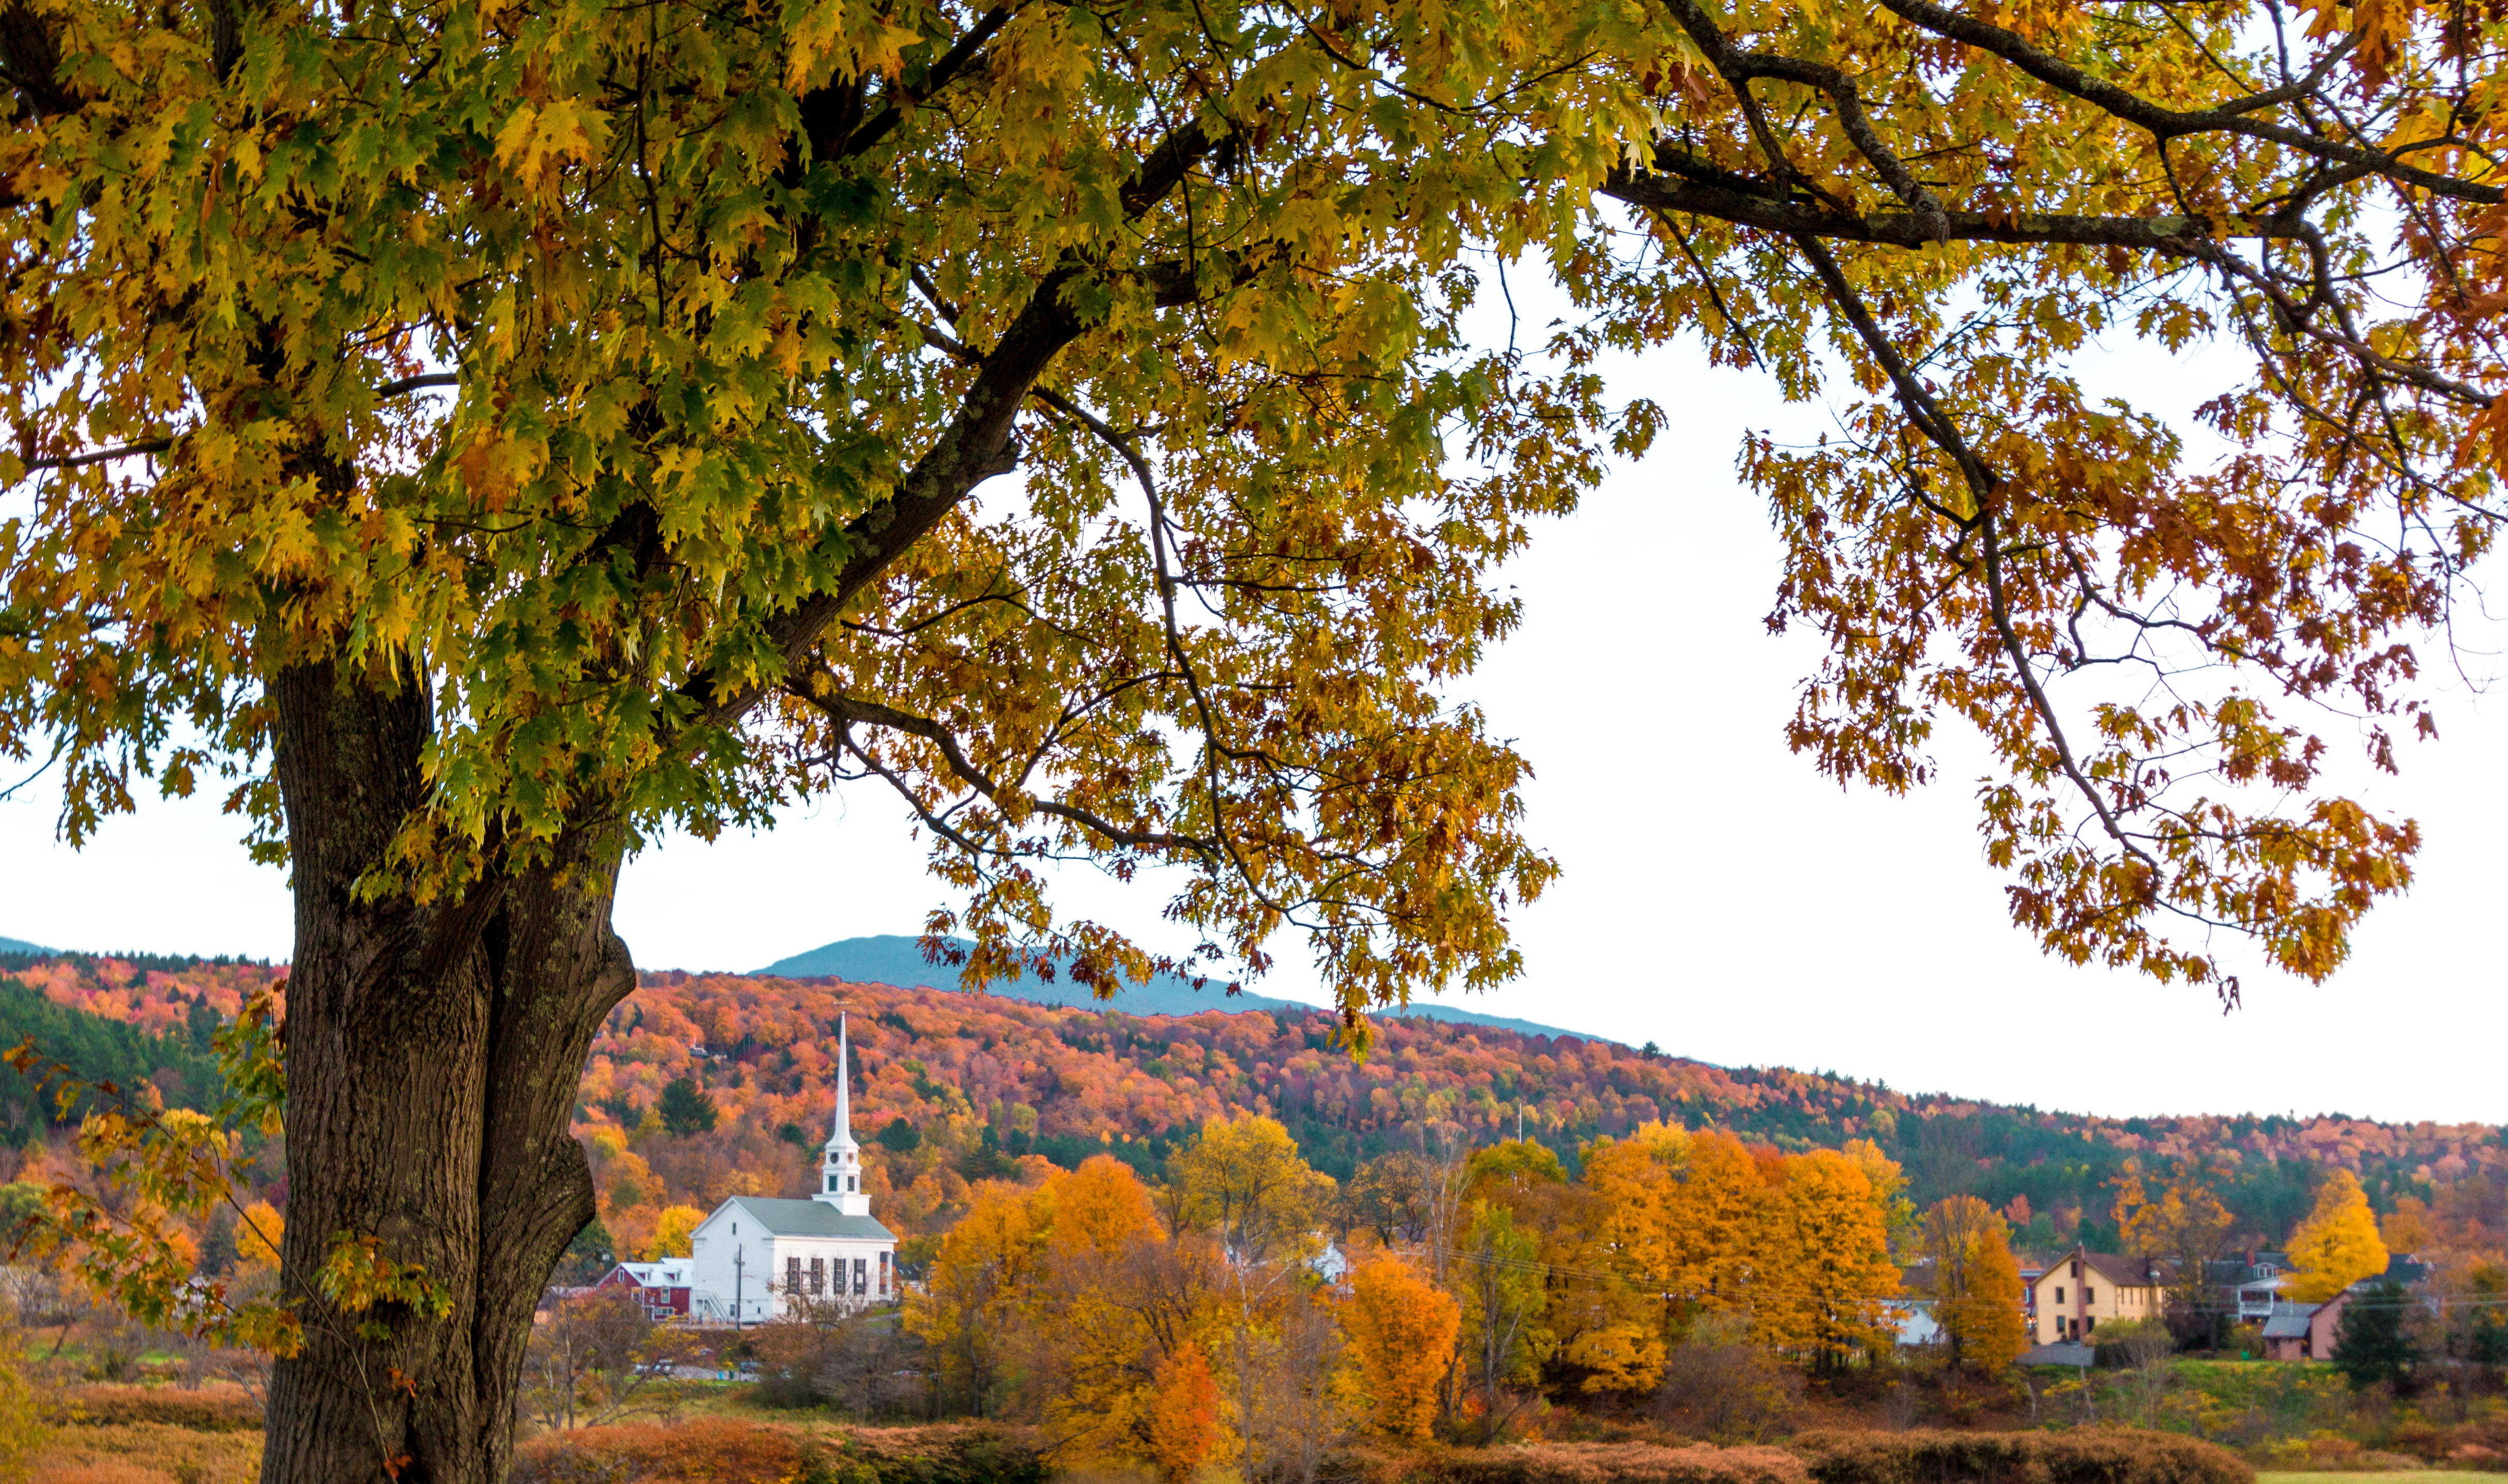 Stowe, Things to Do in Autumn Vermont - Road Trip Photo Guide | Travel-Break.net